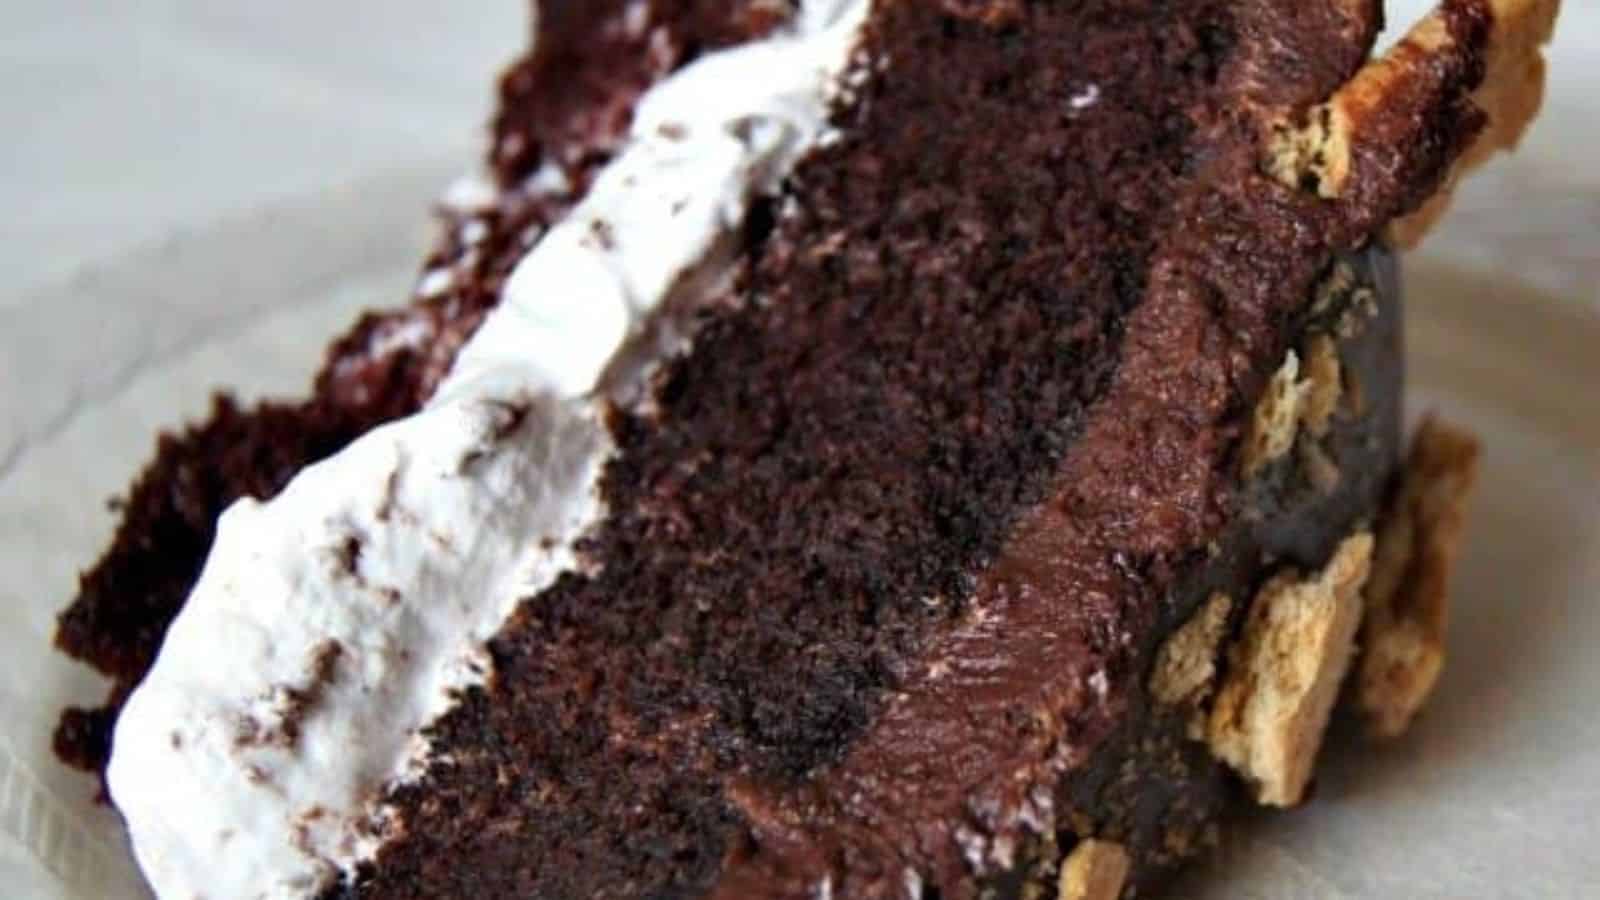 Image shows a Slice of smores cake on its side.